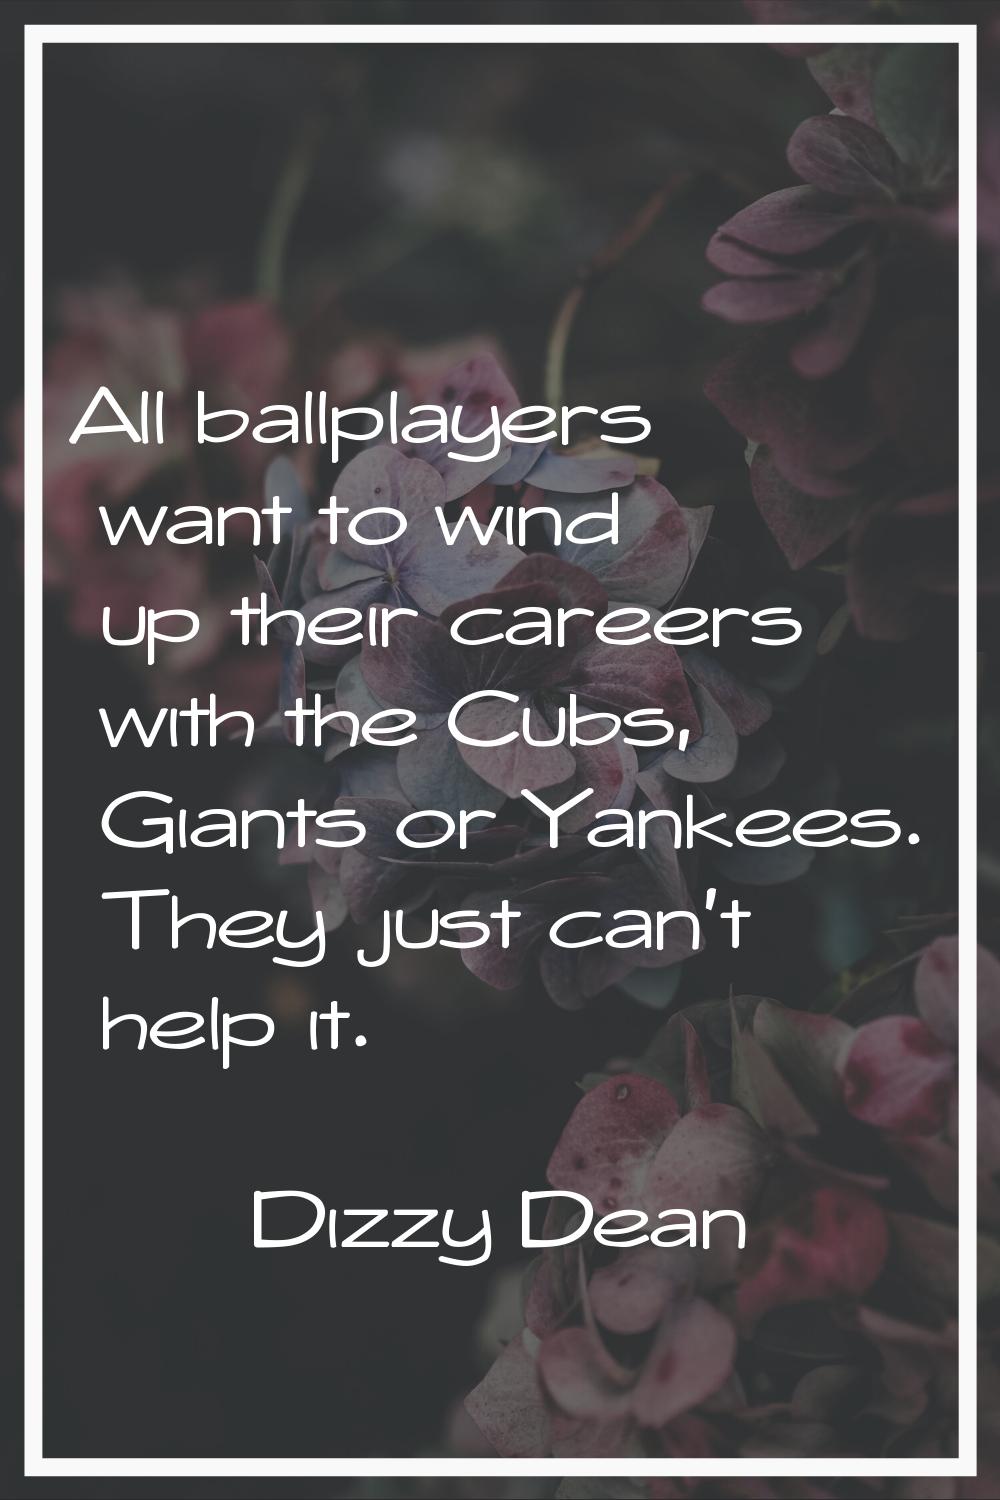 All ballplayers want to wind up their careers with the Cubs, Giants or Yankees. They just can't hel